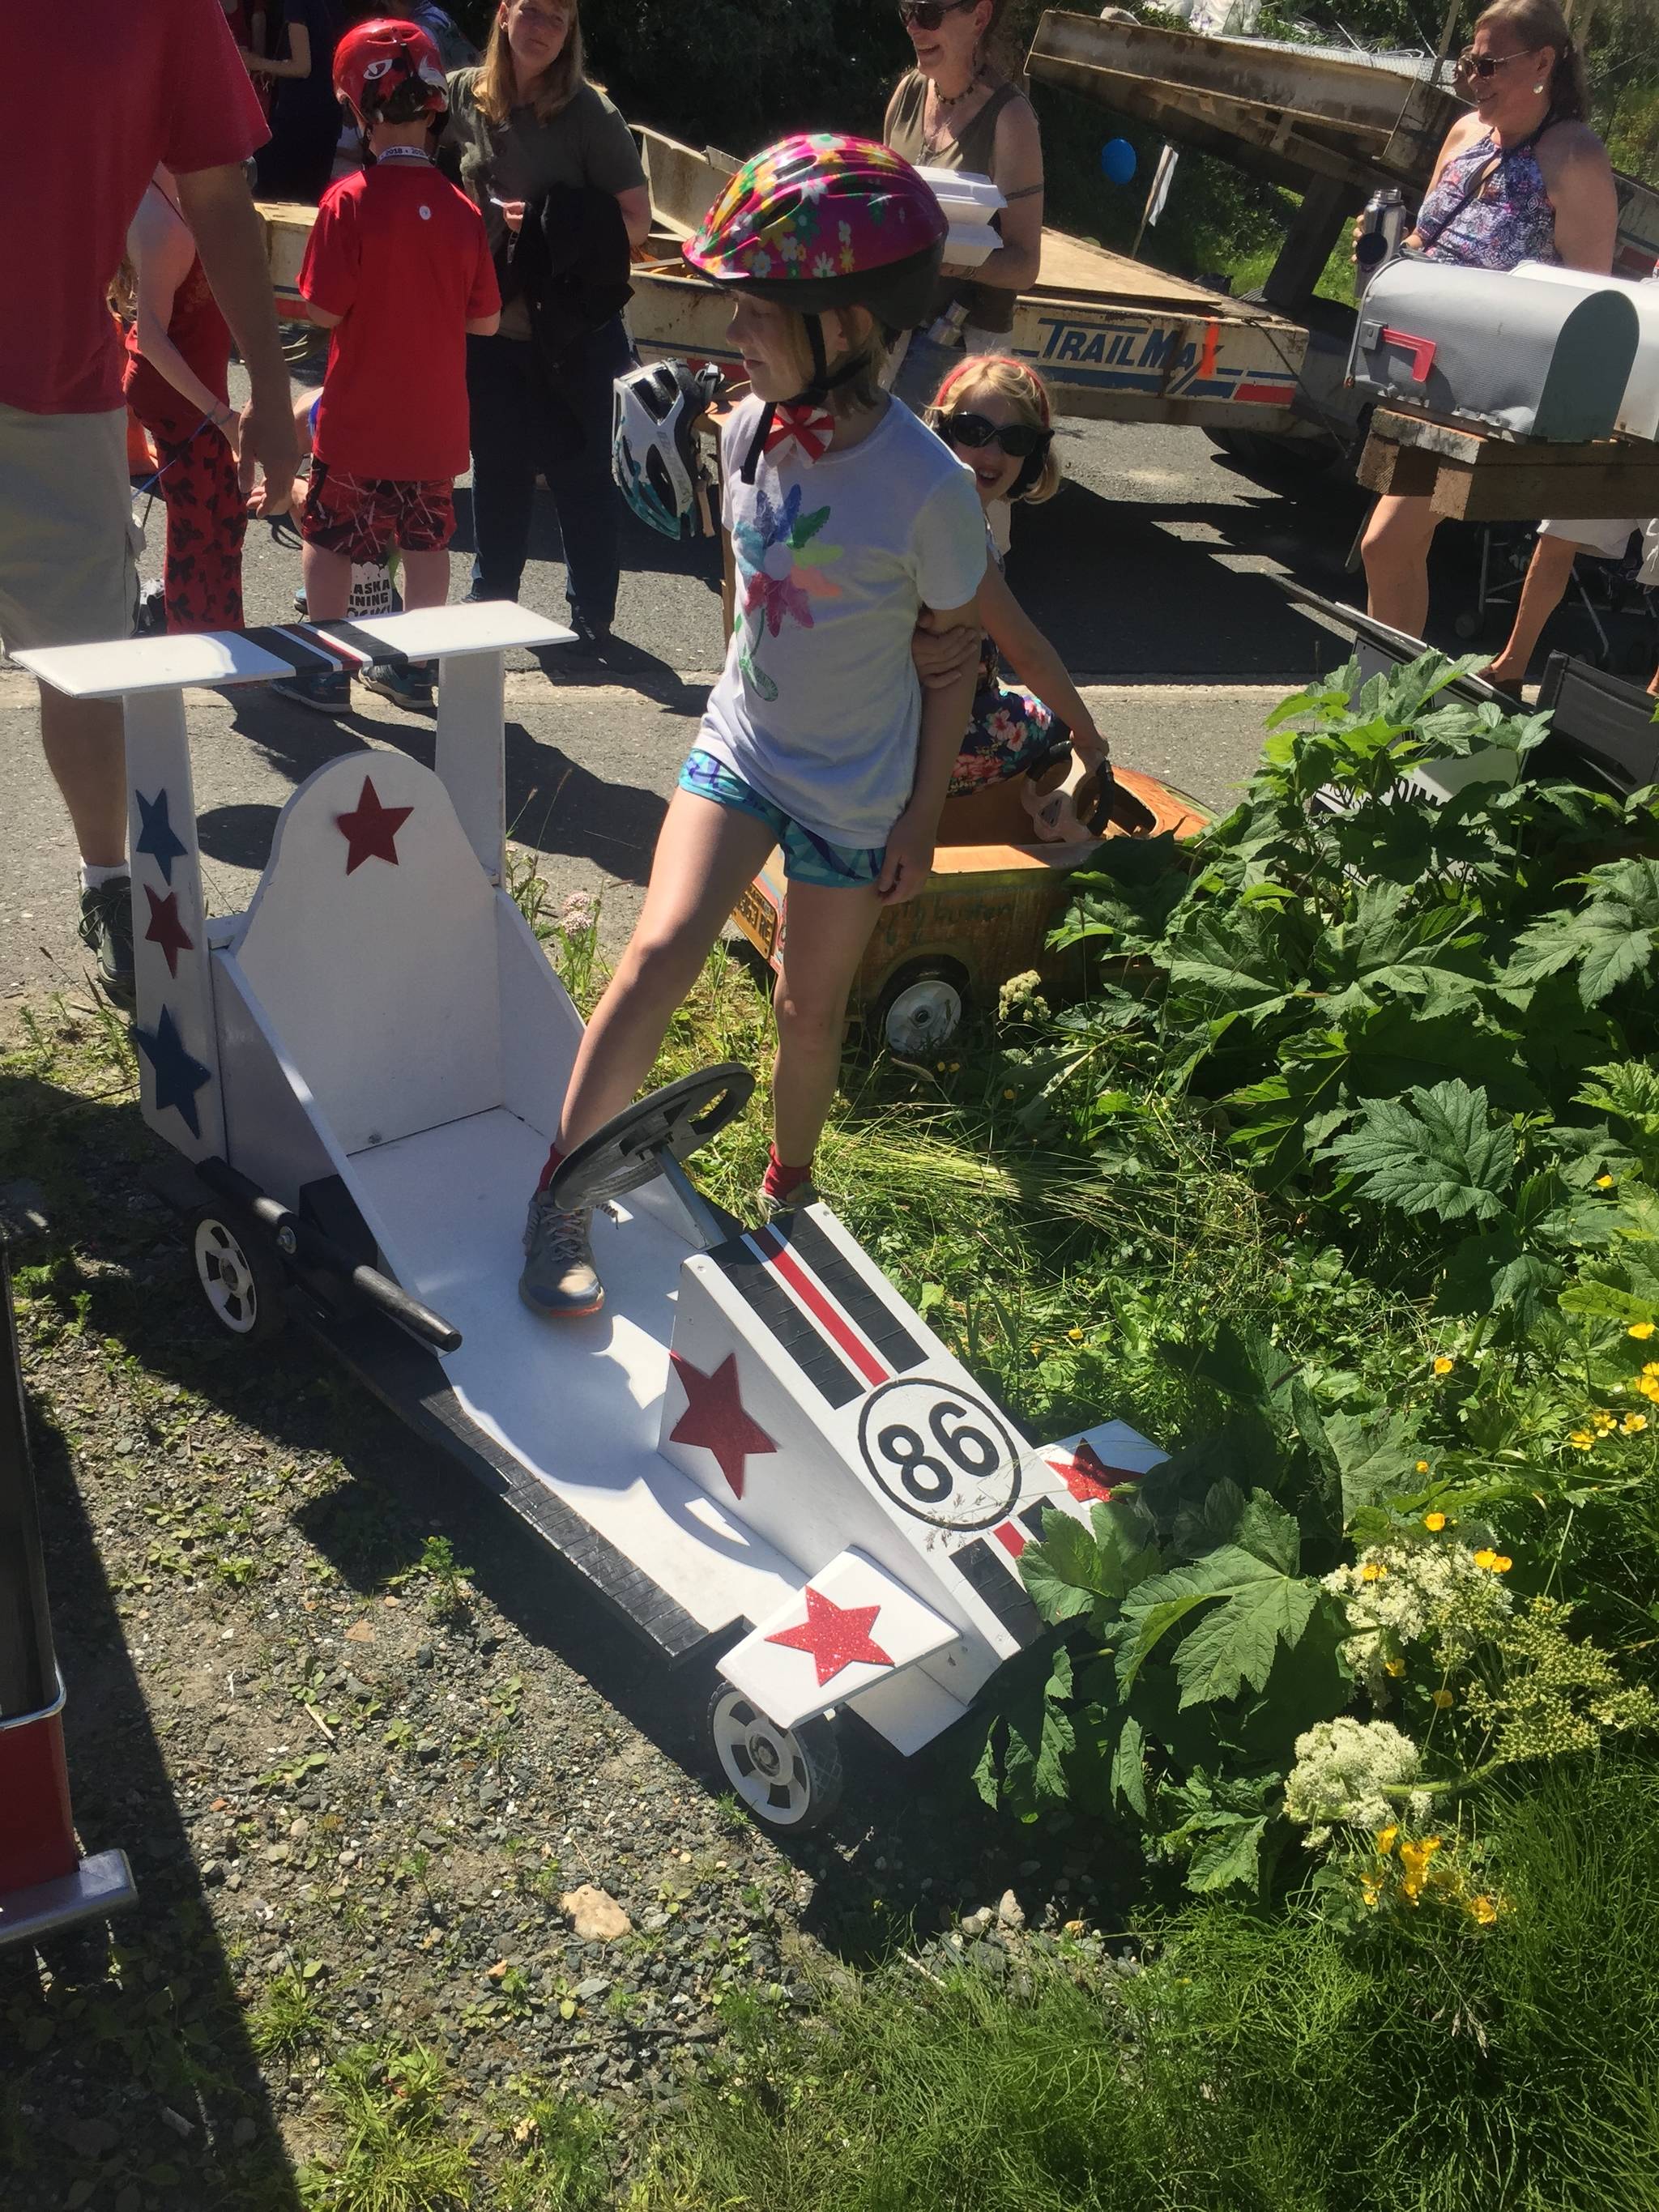 Brynne Loggy-Smith, 10, gears up for the 2018 Soapbox Challenge on St. Ann’s Avenue. (Nolin Ainsworth | Juneau Empire)